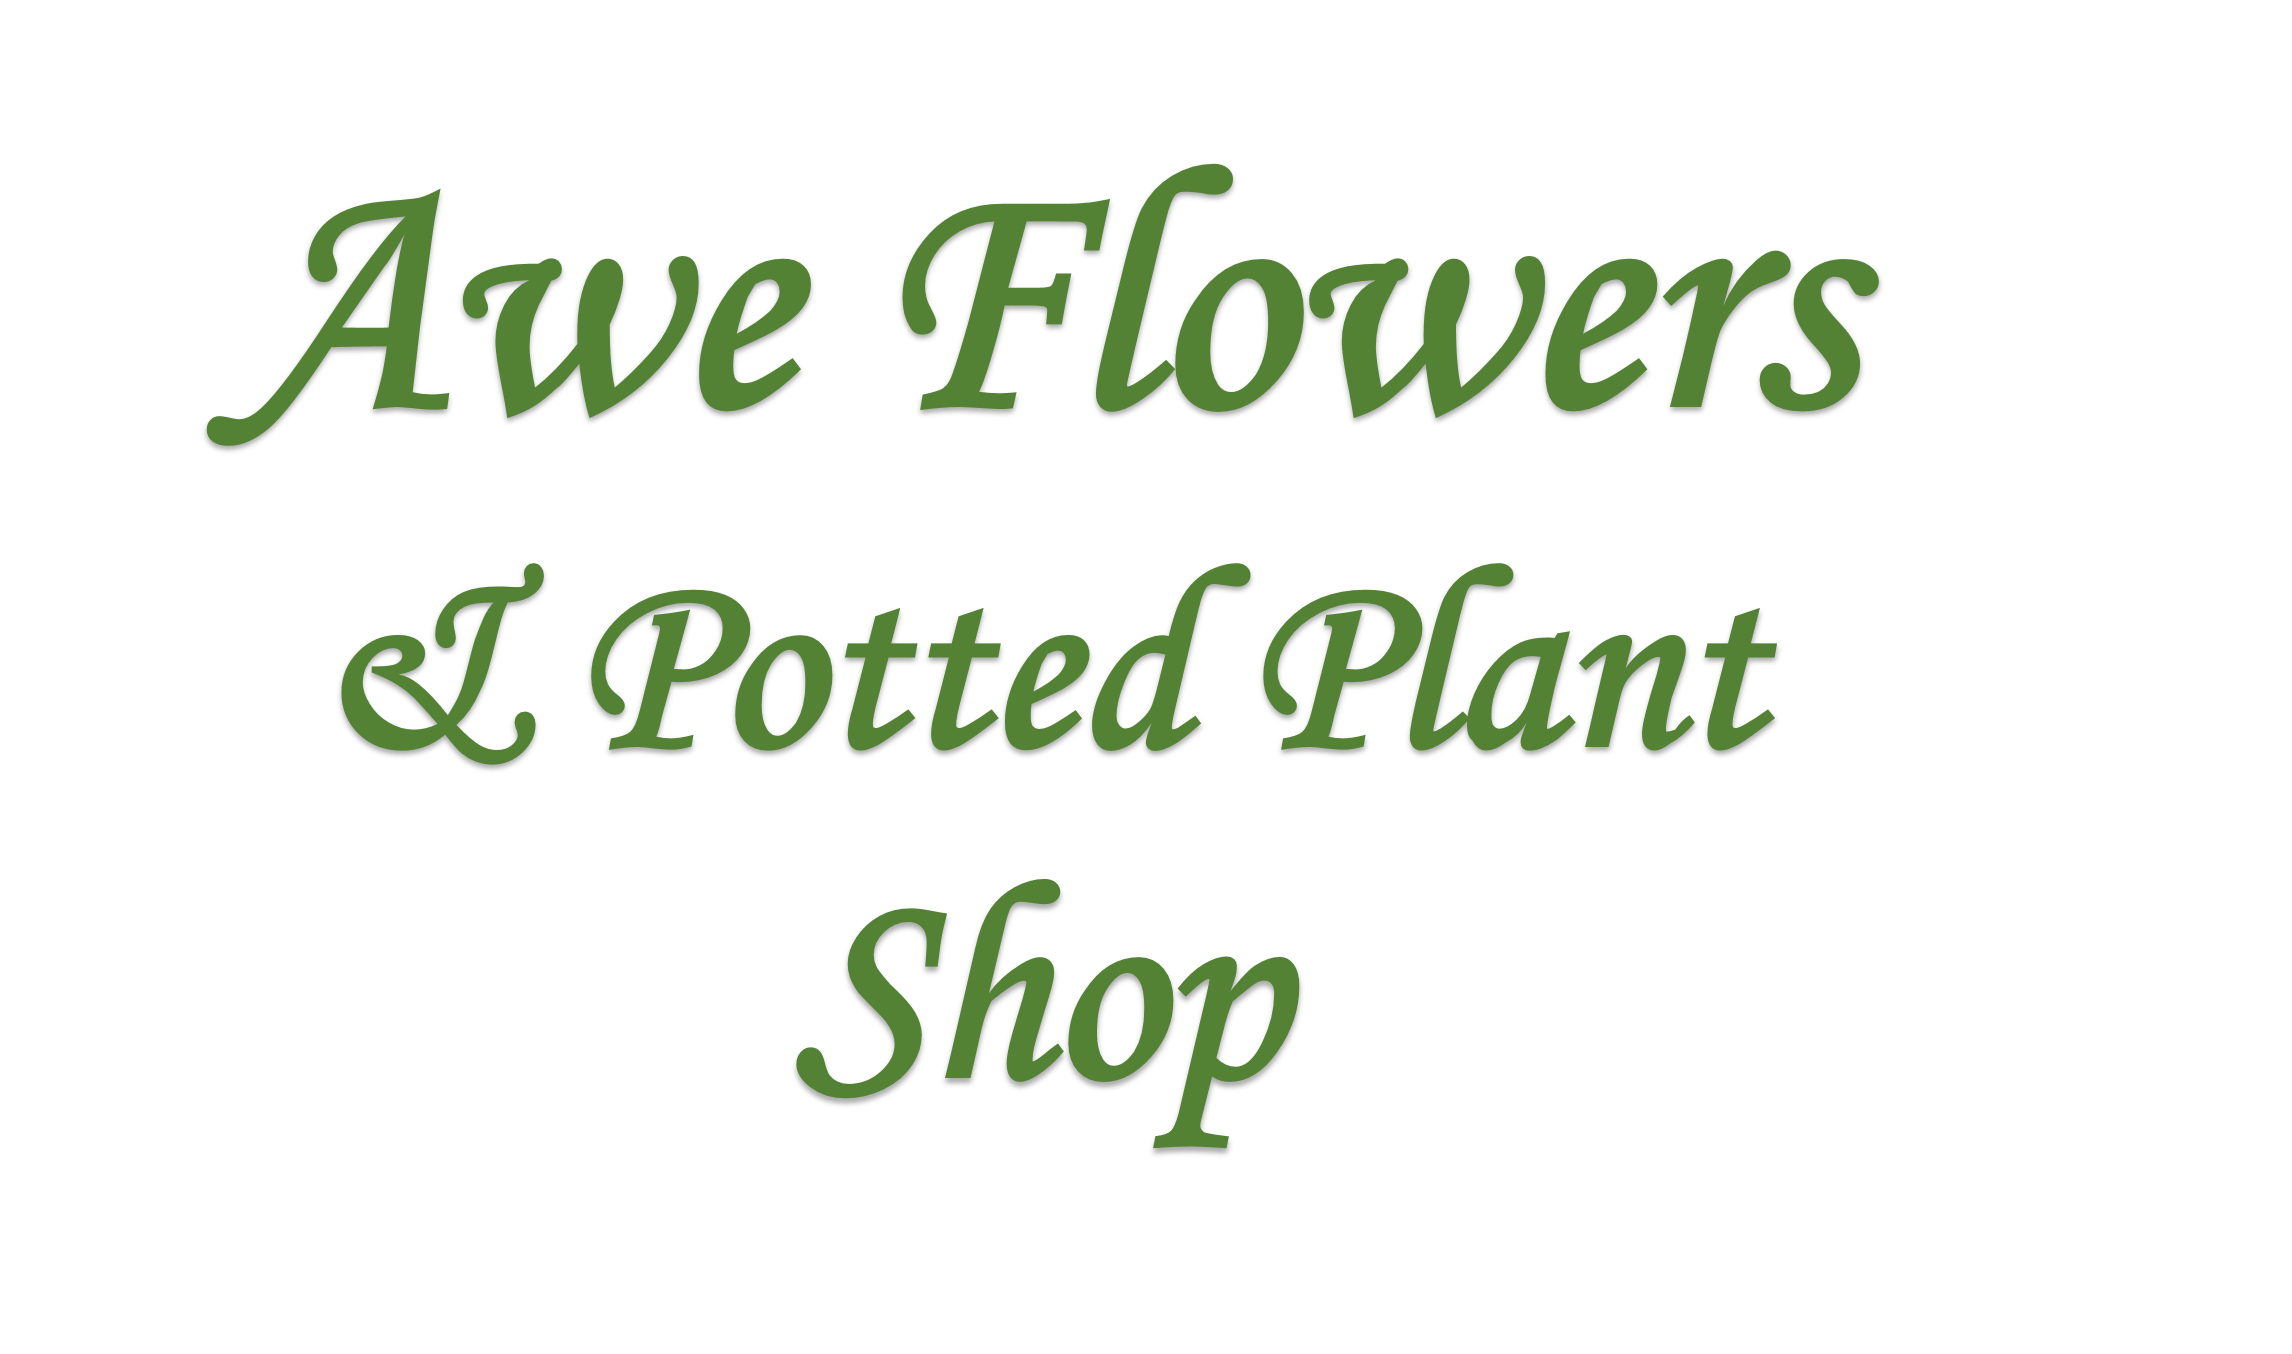 Awe Flowers & Potted Plant Shop Photo